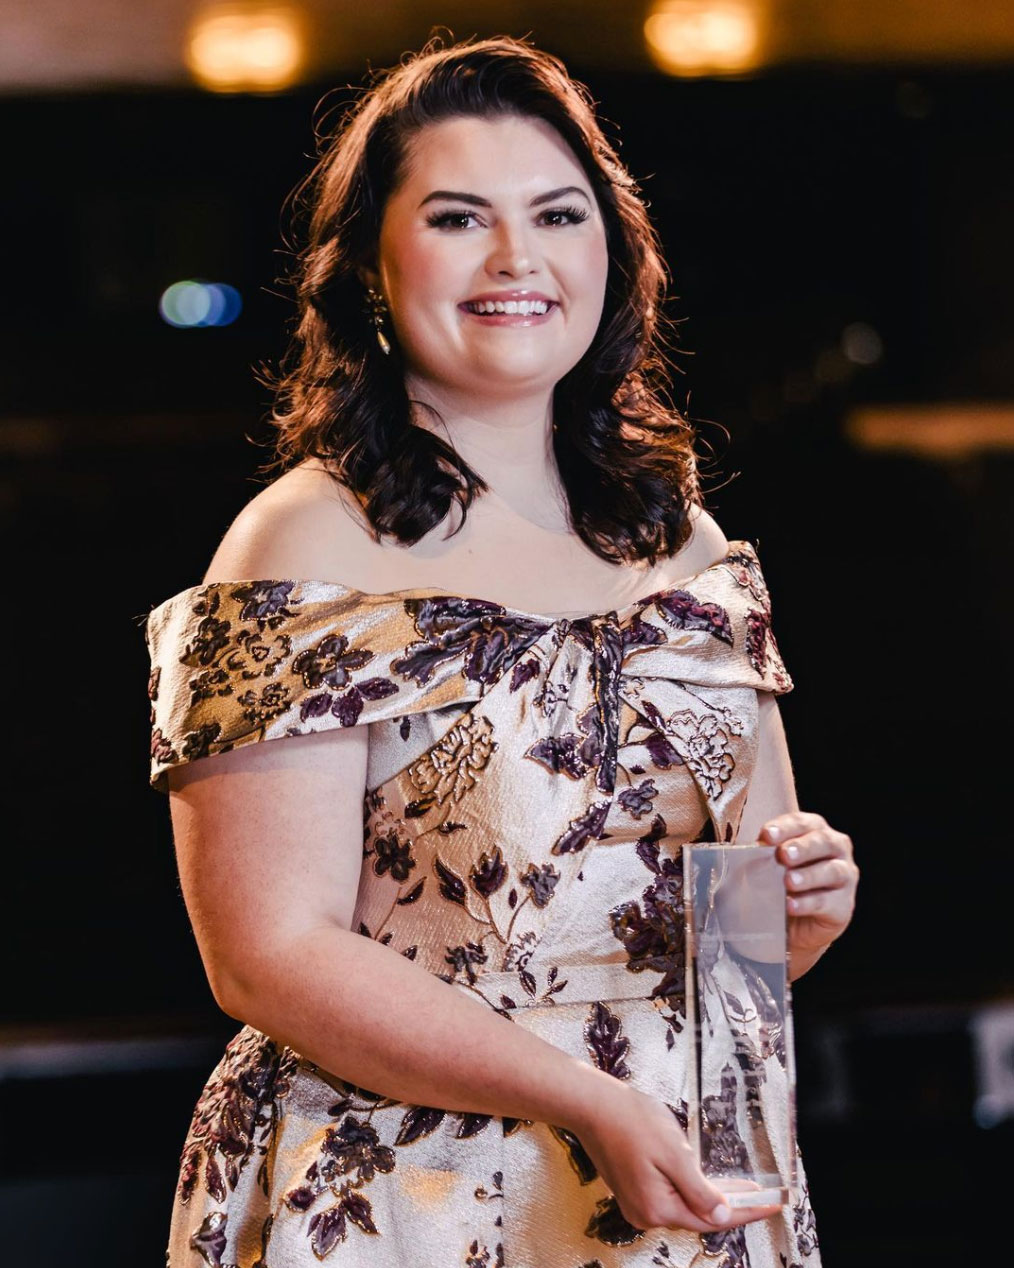 Graduate student Bethany Jelinek wins People's Choice Award in Dallas Opera Competition